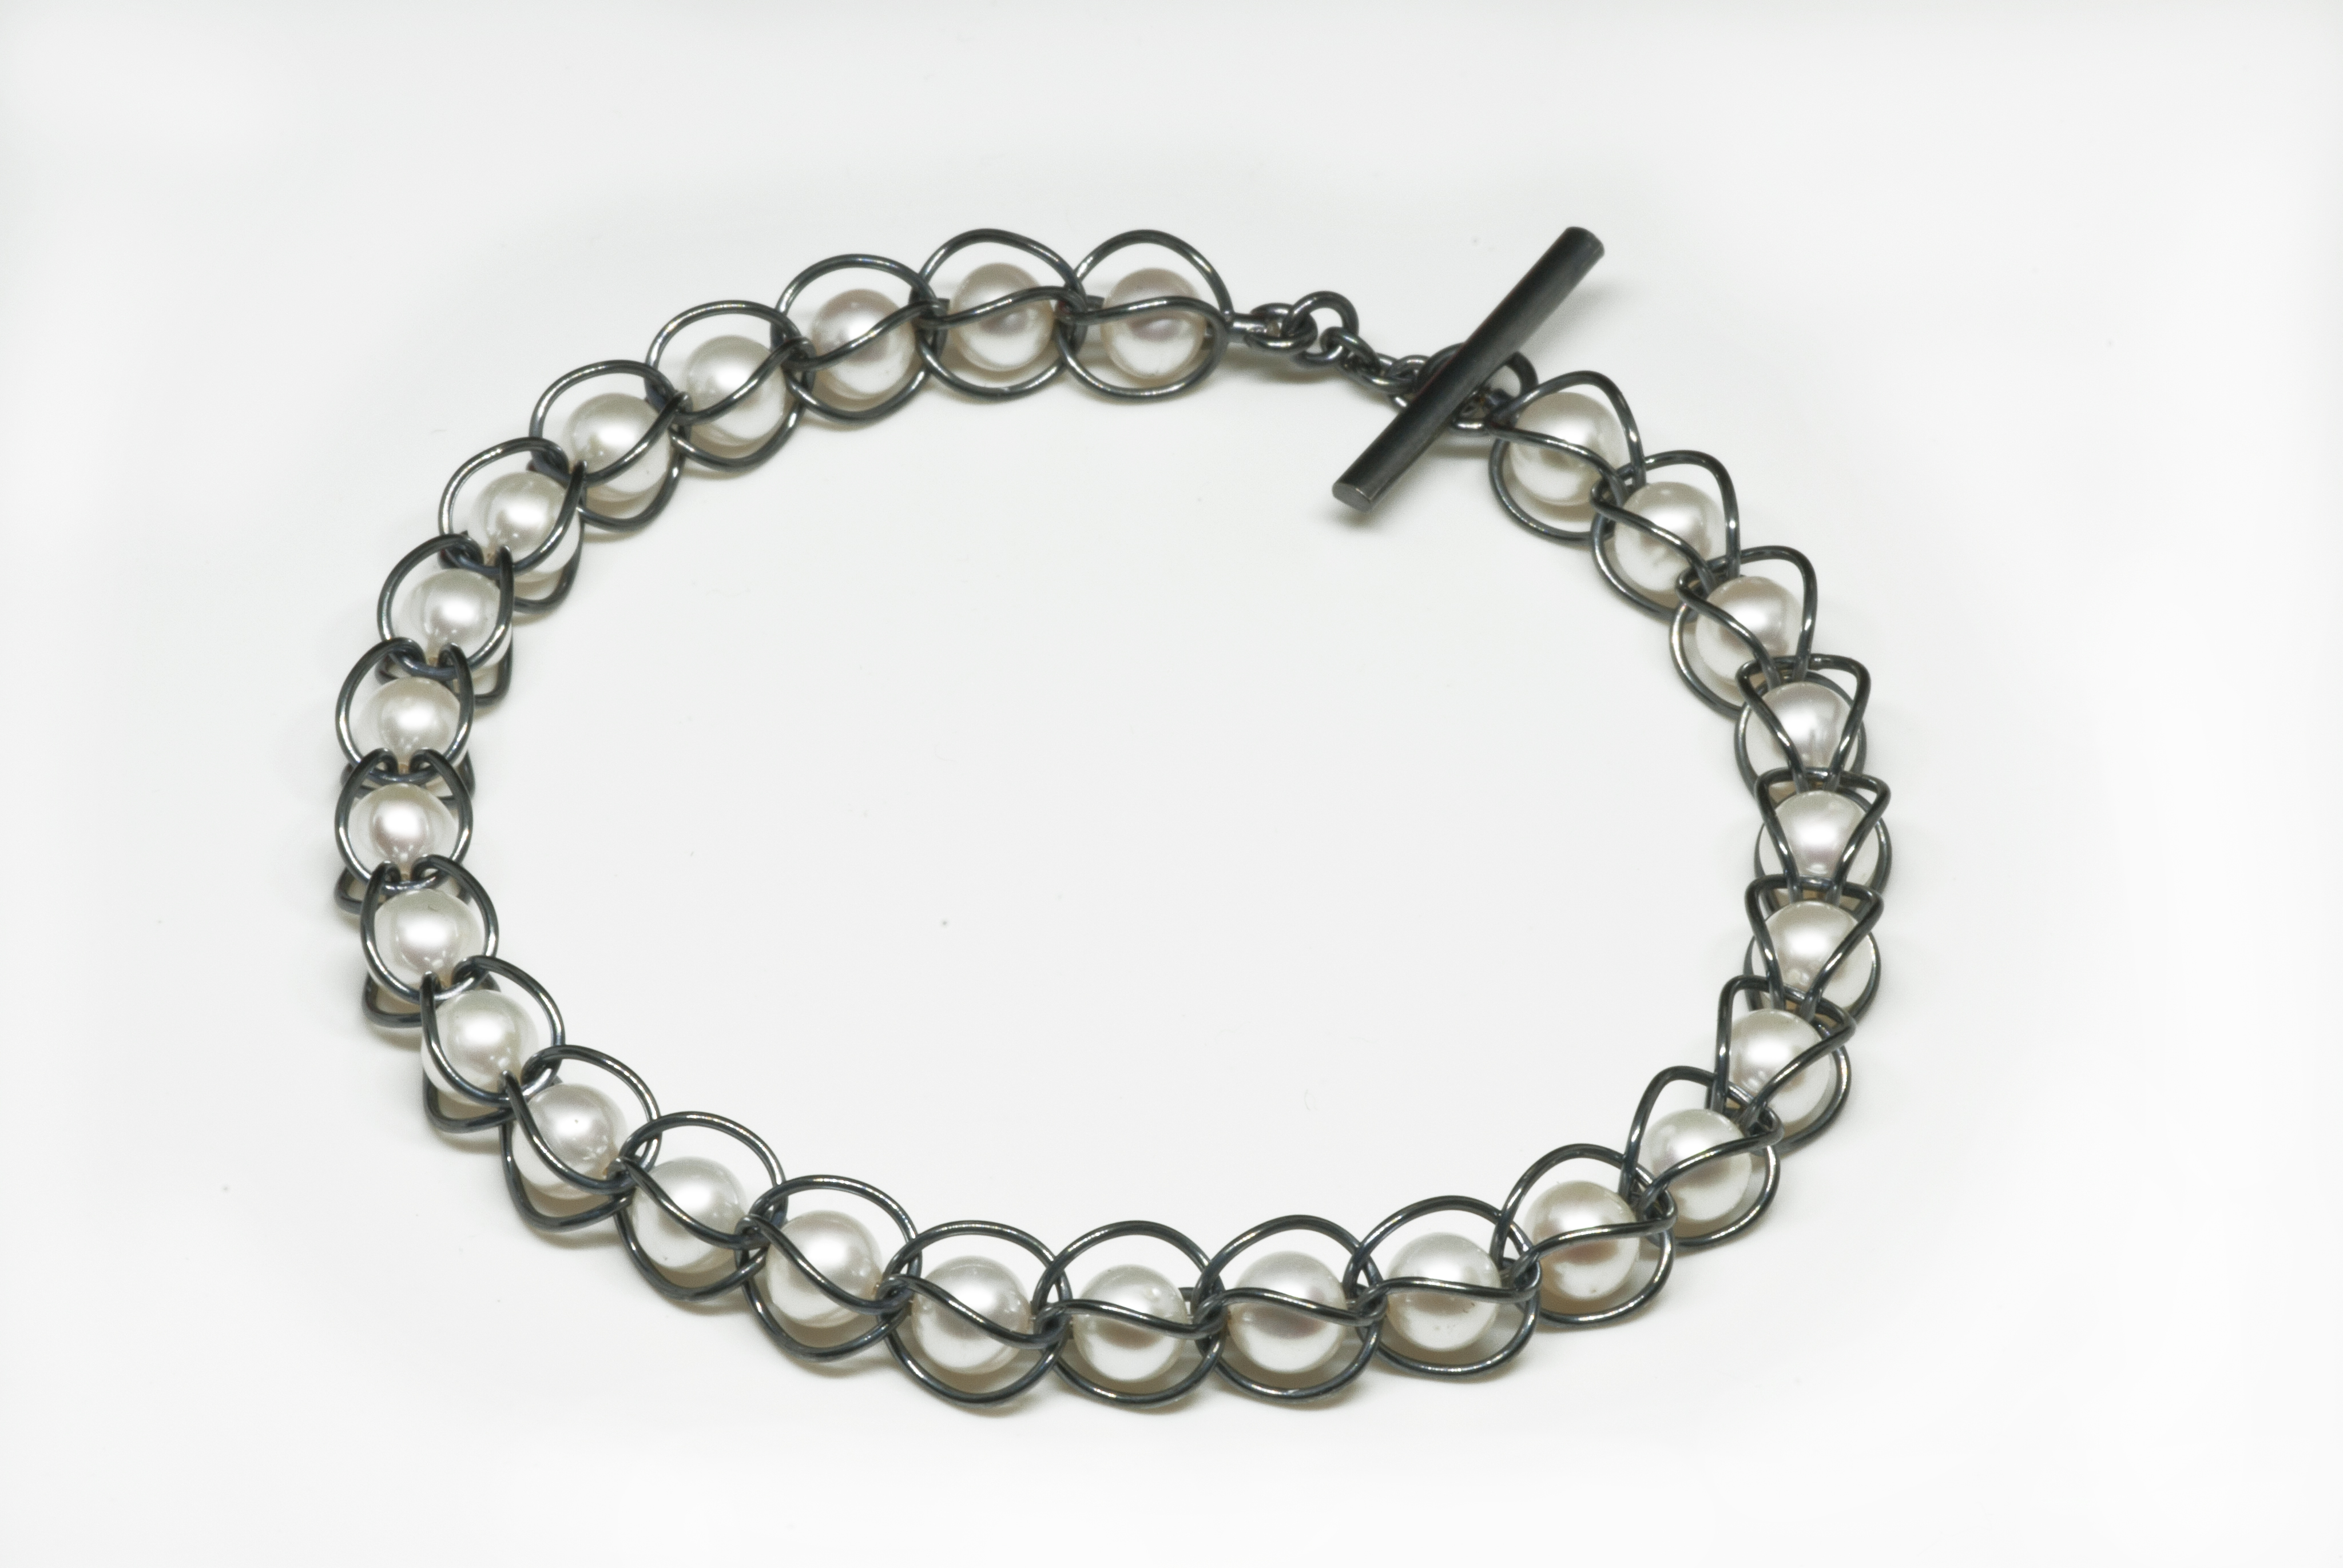 Foxtail Bracelet with pearls